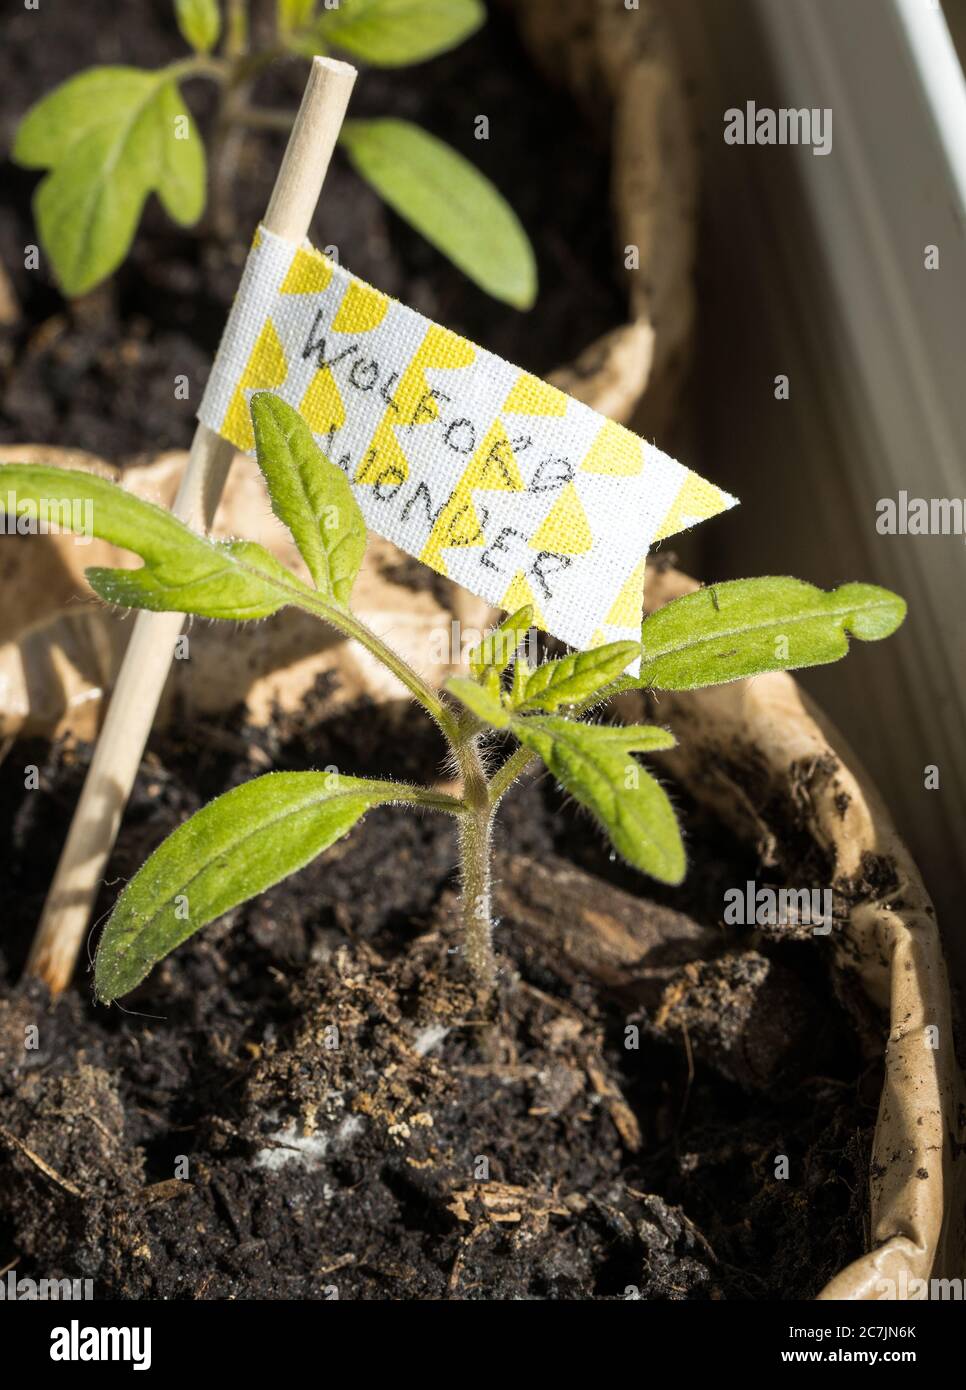 Homegrowing various tomato seedlings in DIY tetrapack plant pots Stock Photo